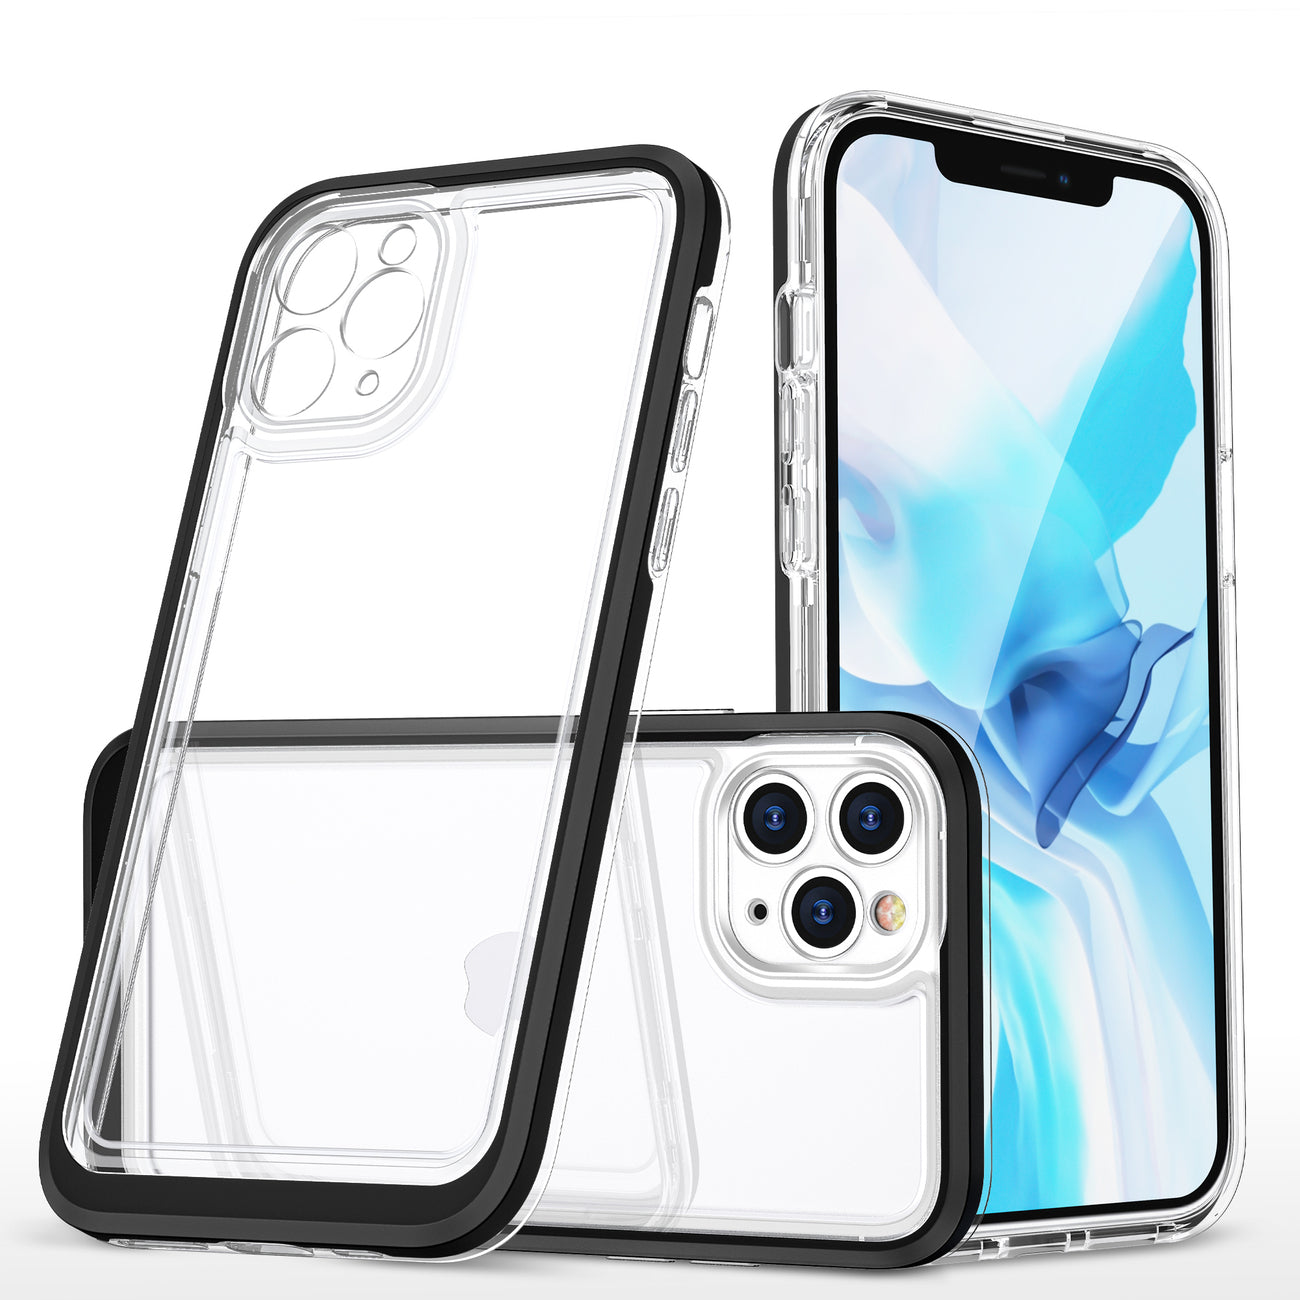 Clear 3in1 case for iPhone 11 Pro Max case gel cover with frame black